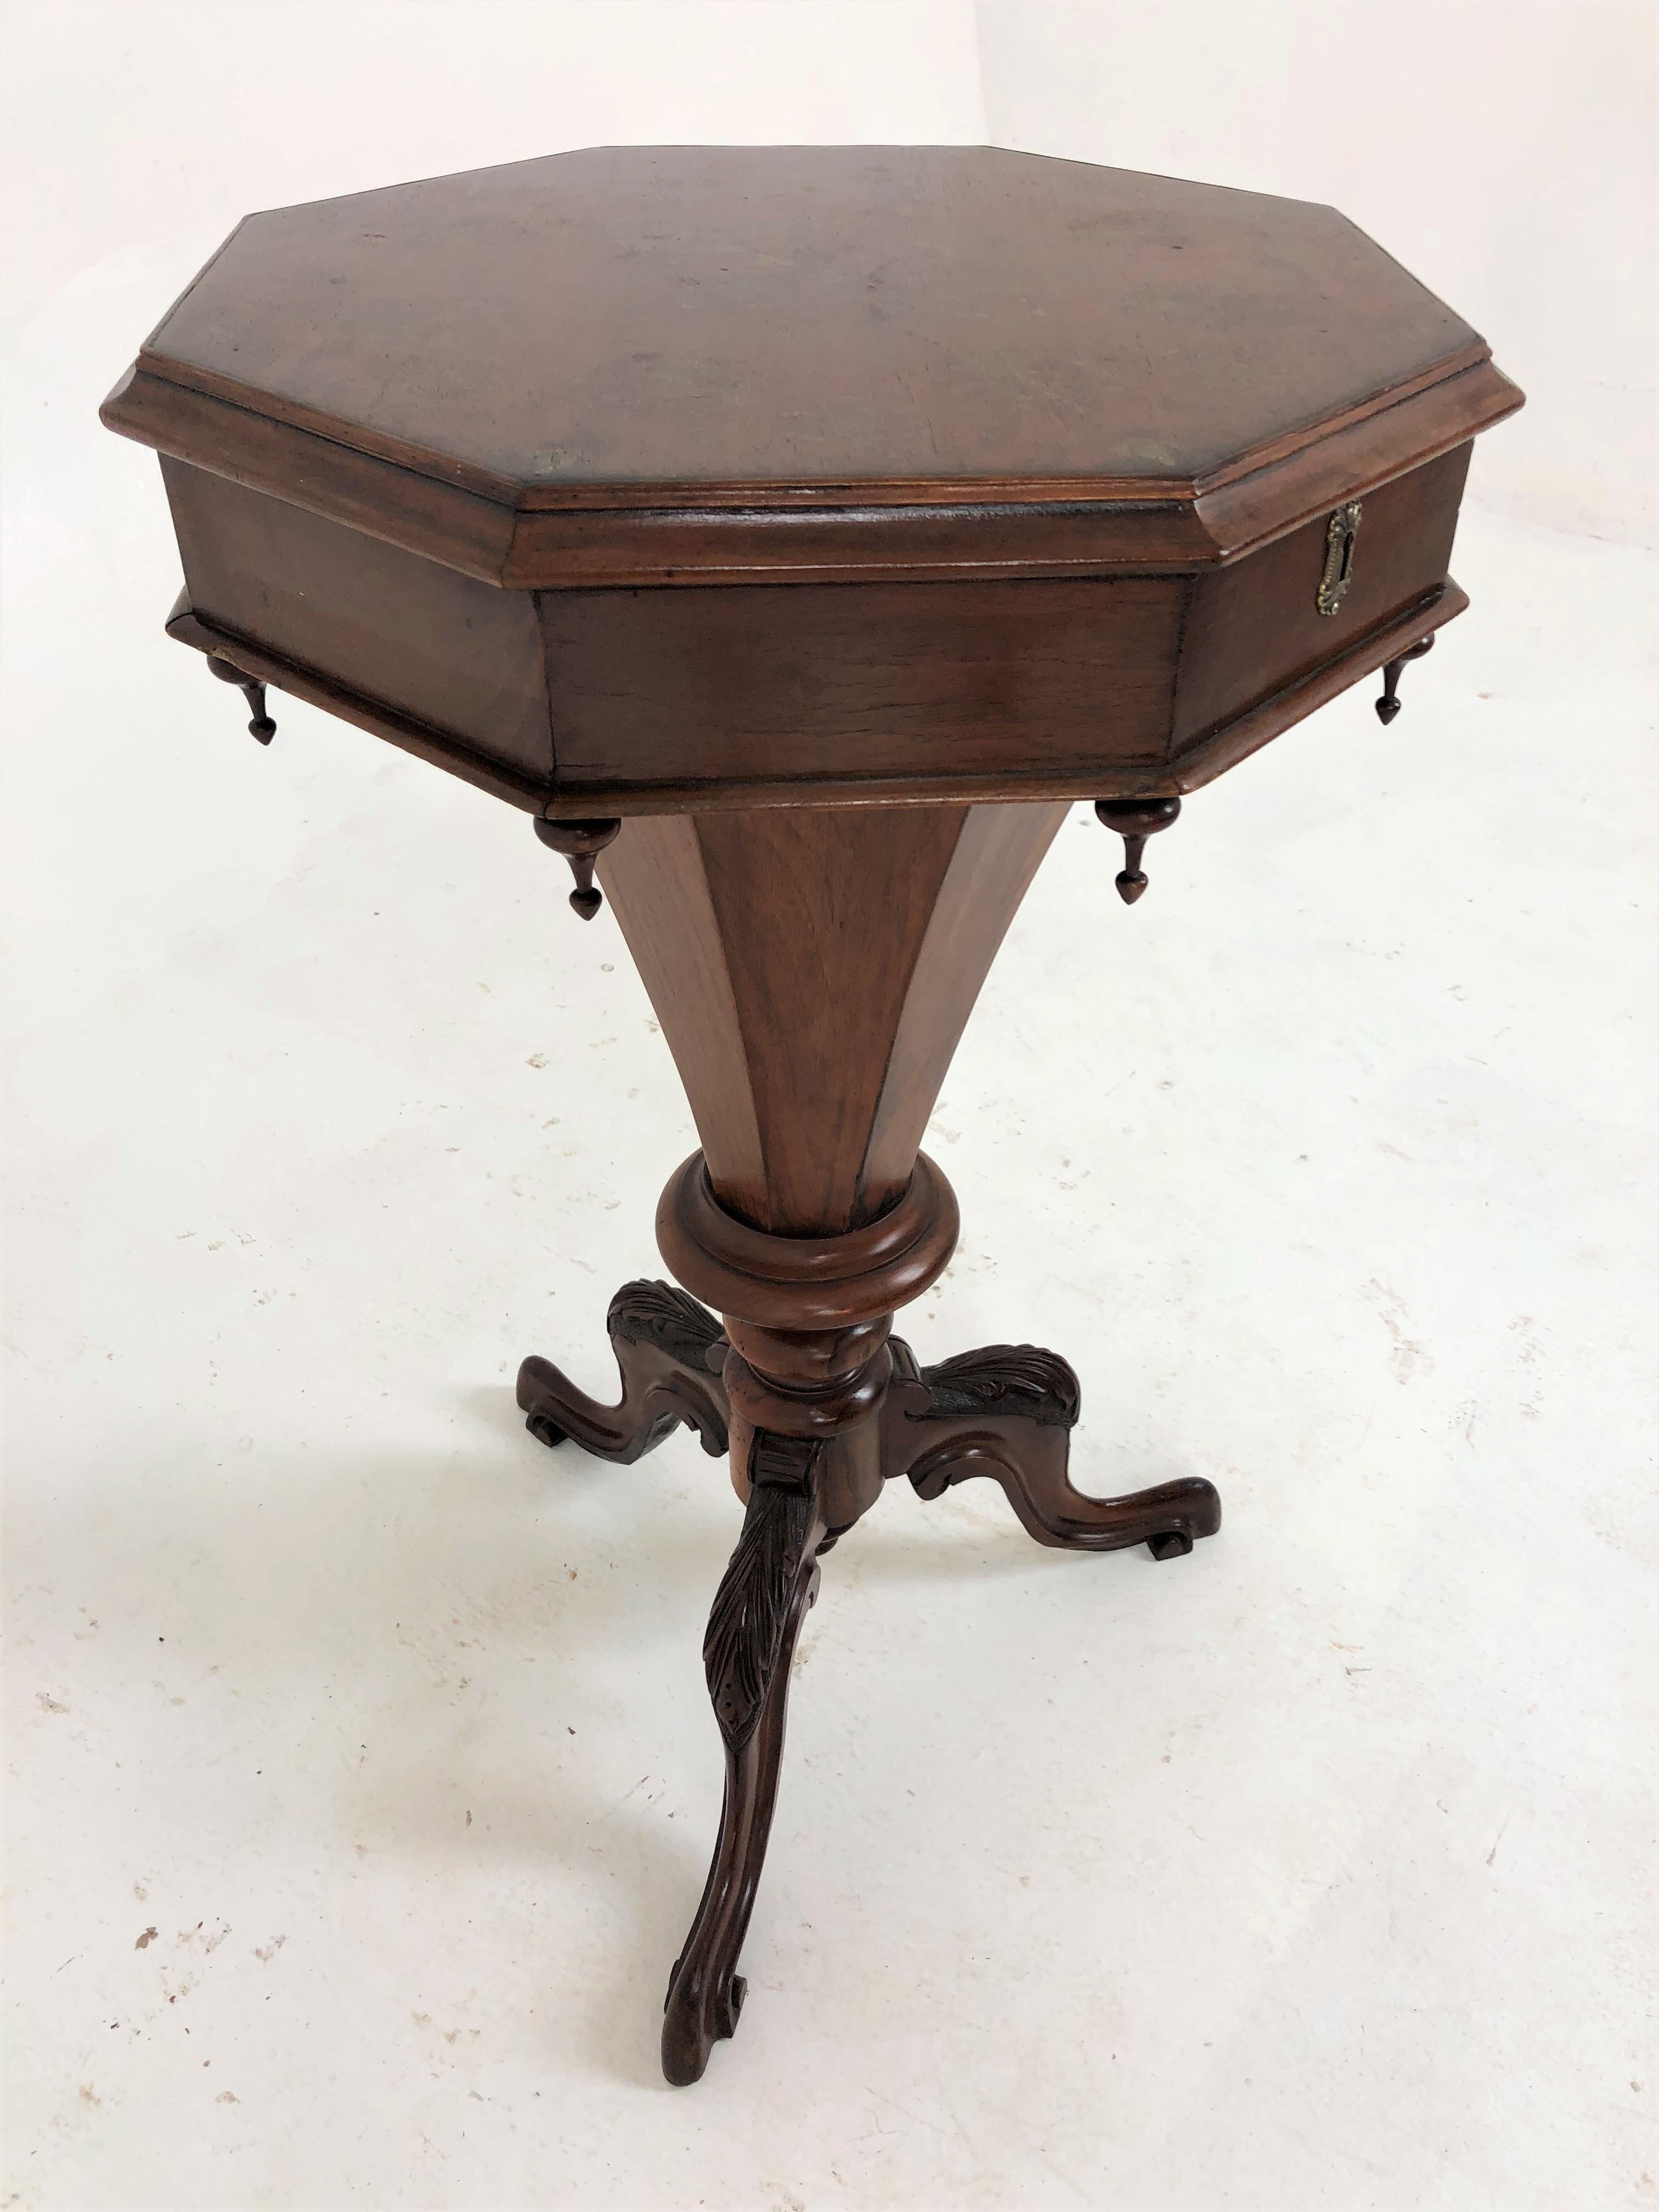 Antique Victorian Hexagonal Walnut, Sewing Table, Work Table, Scotland 1870, H705

Scotland 1870
Solid Walnut + Veneer
With painted flowers to the top
The top opens to reveal a nice original interior
The hexagonal shape is reflected in the